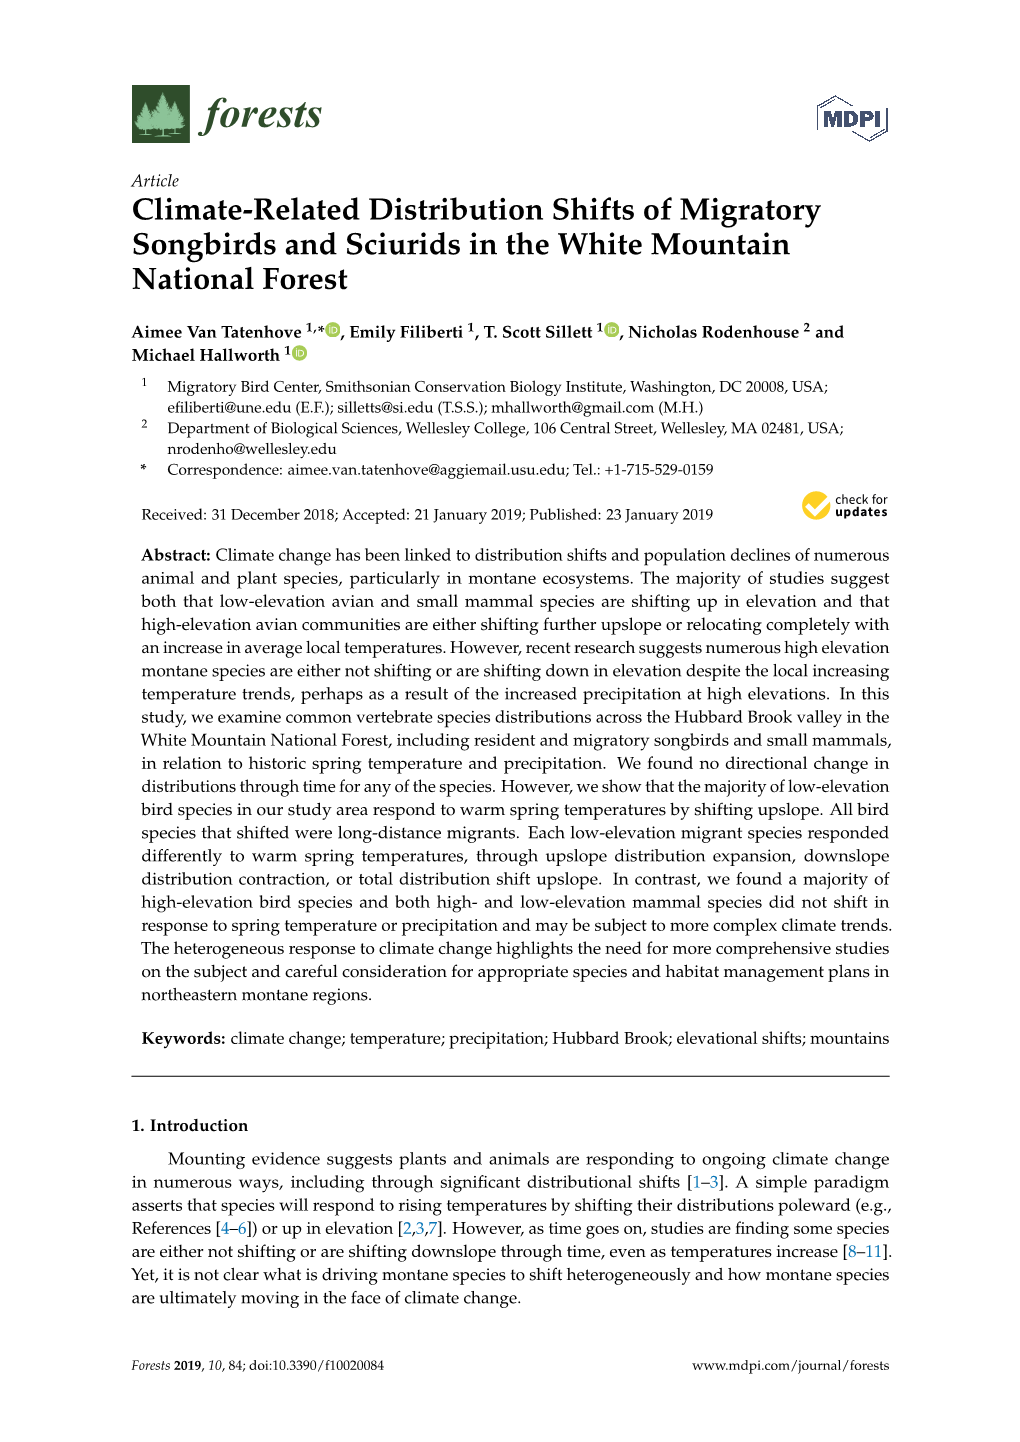 Climate-Related Distribution Shifts of Migratory Songbirds and Sciurids in the White Mountain National Forest